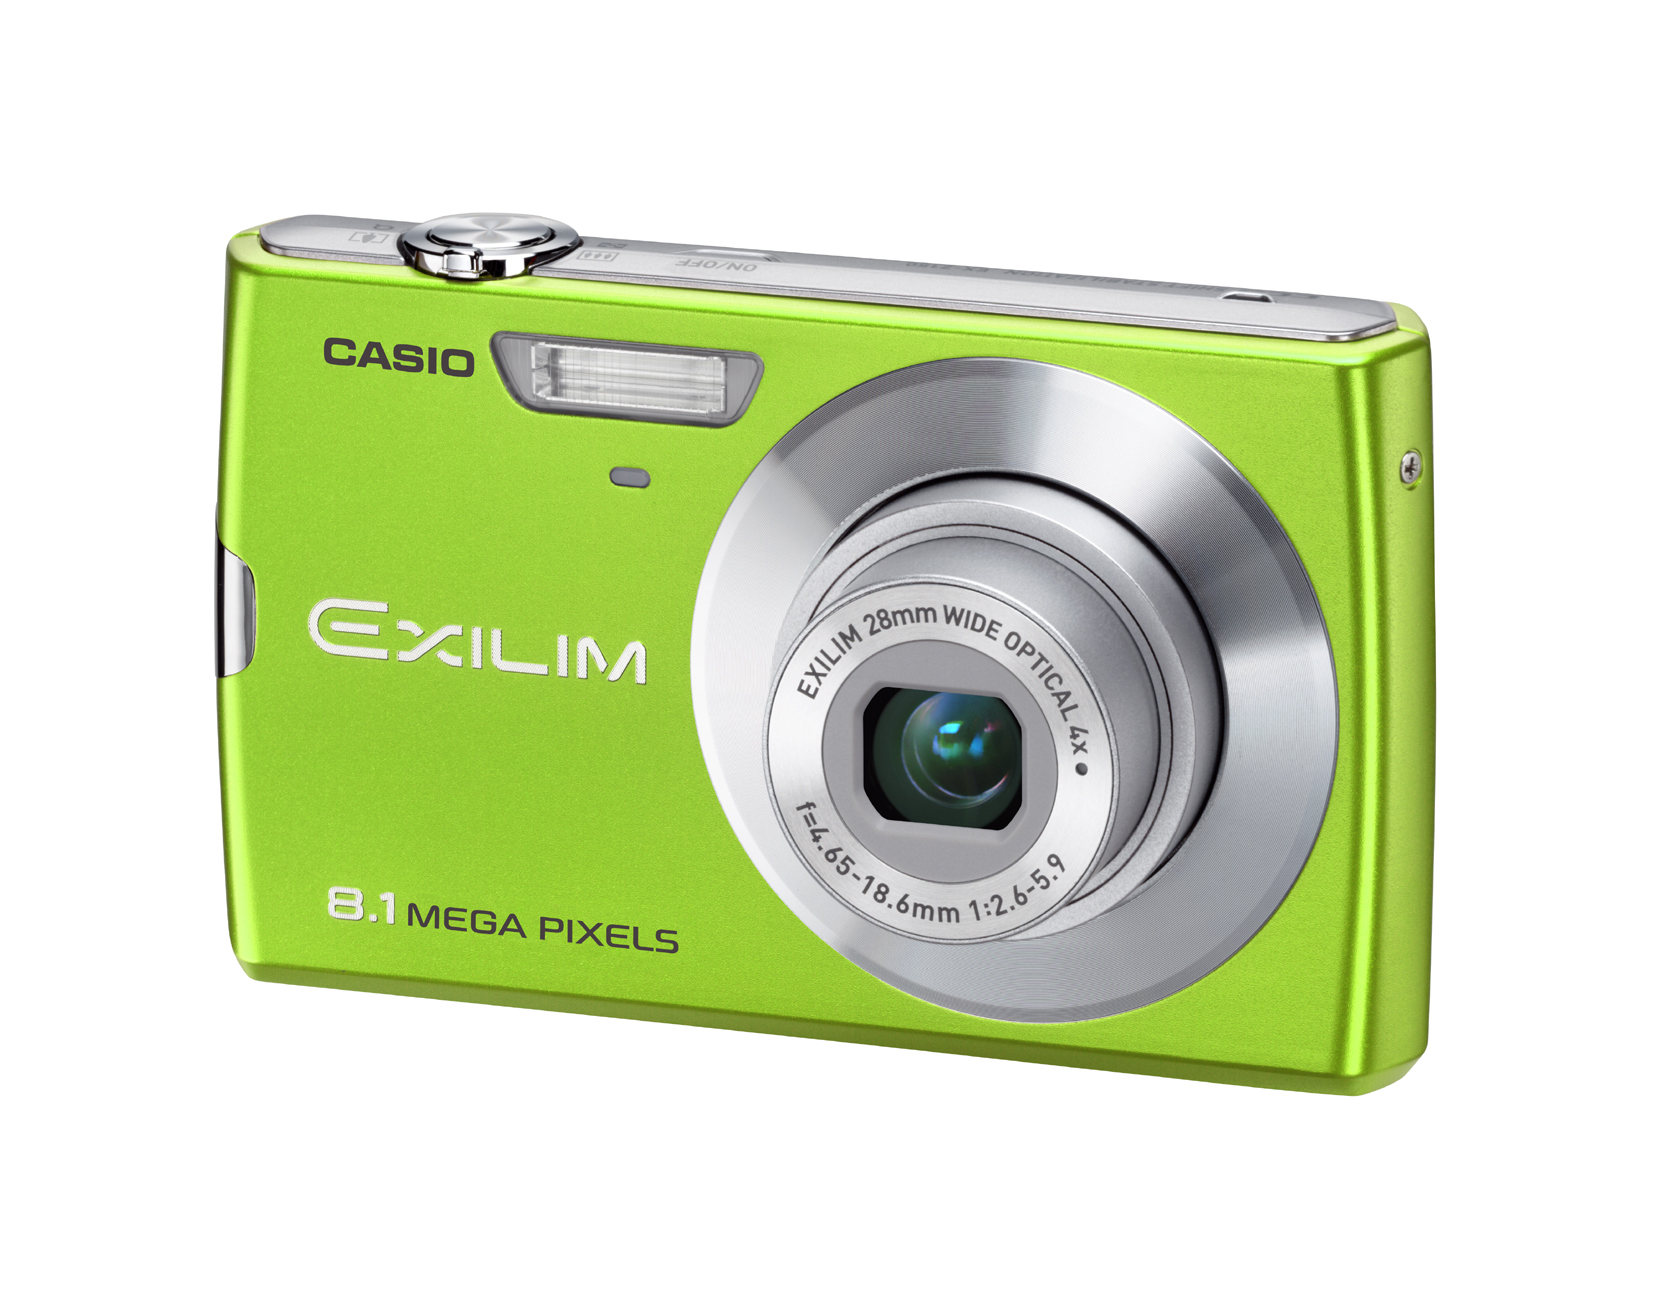 Casio announces super-slim, wide-angle digital camera with 4x zoom and 3-inch LCD